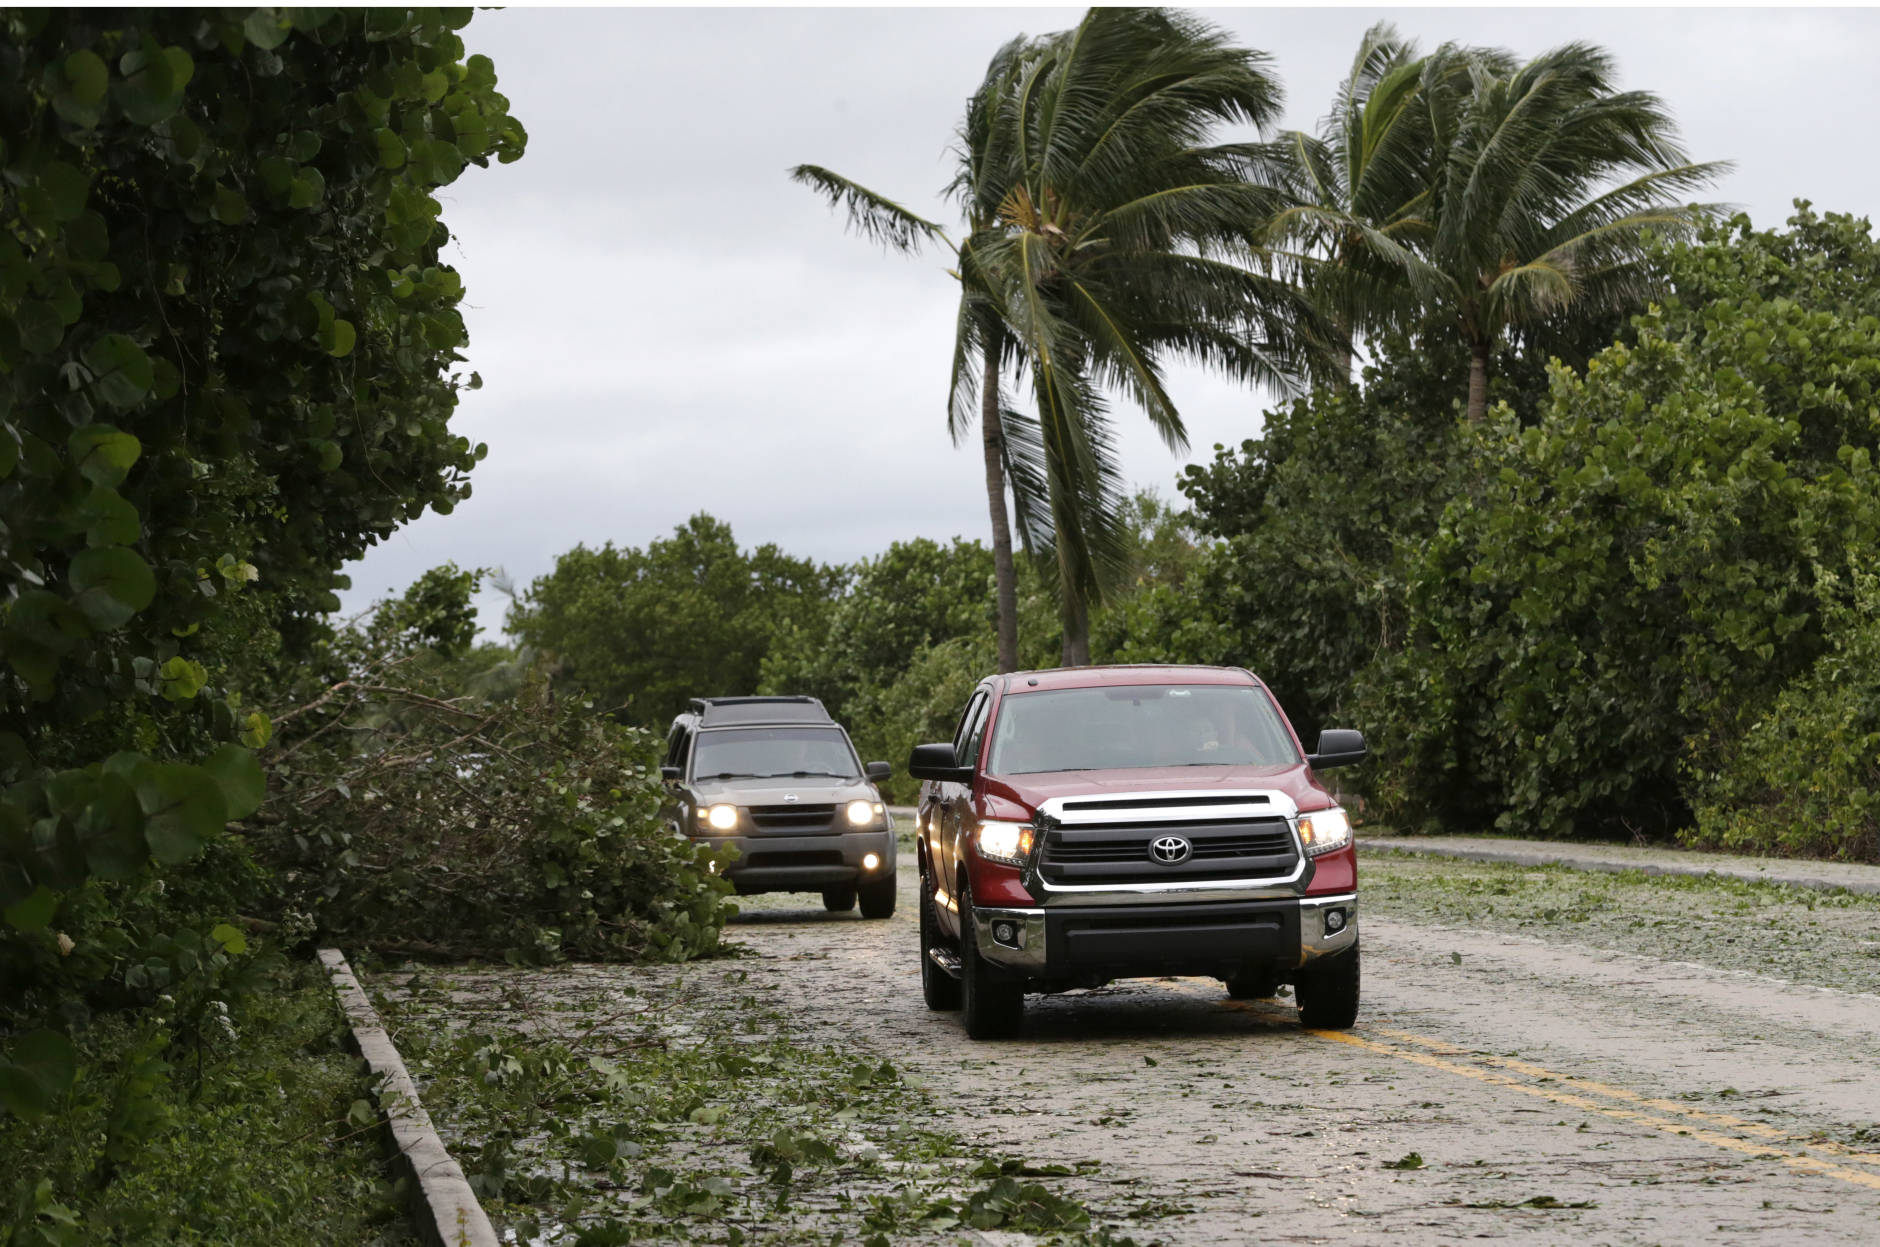 Cars avoid a tree limb on a leaf-strewn road after Hurricane Matthew passed off shore, Friday, Oct. 7, 2016, in Jupiter, Fla.  Matthew was downgraded to a Category 3 hurricane overnight with the strongest winds of 120 mph just offshore as the storm pushed north, threatening hundreds of miles of coastline in Florida, Georgia and South Carolina.  (AP Photo/Wilfredo Lee)